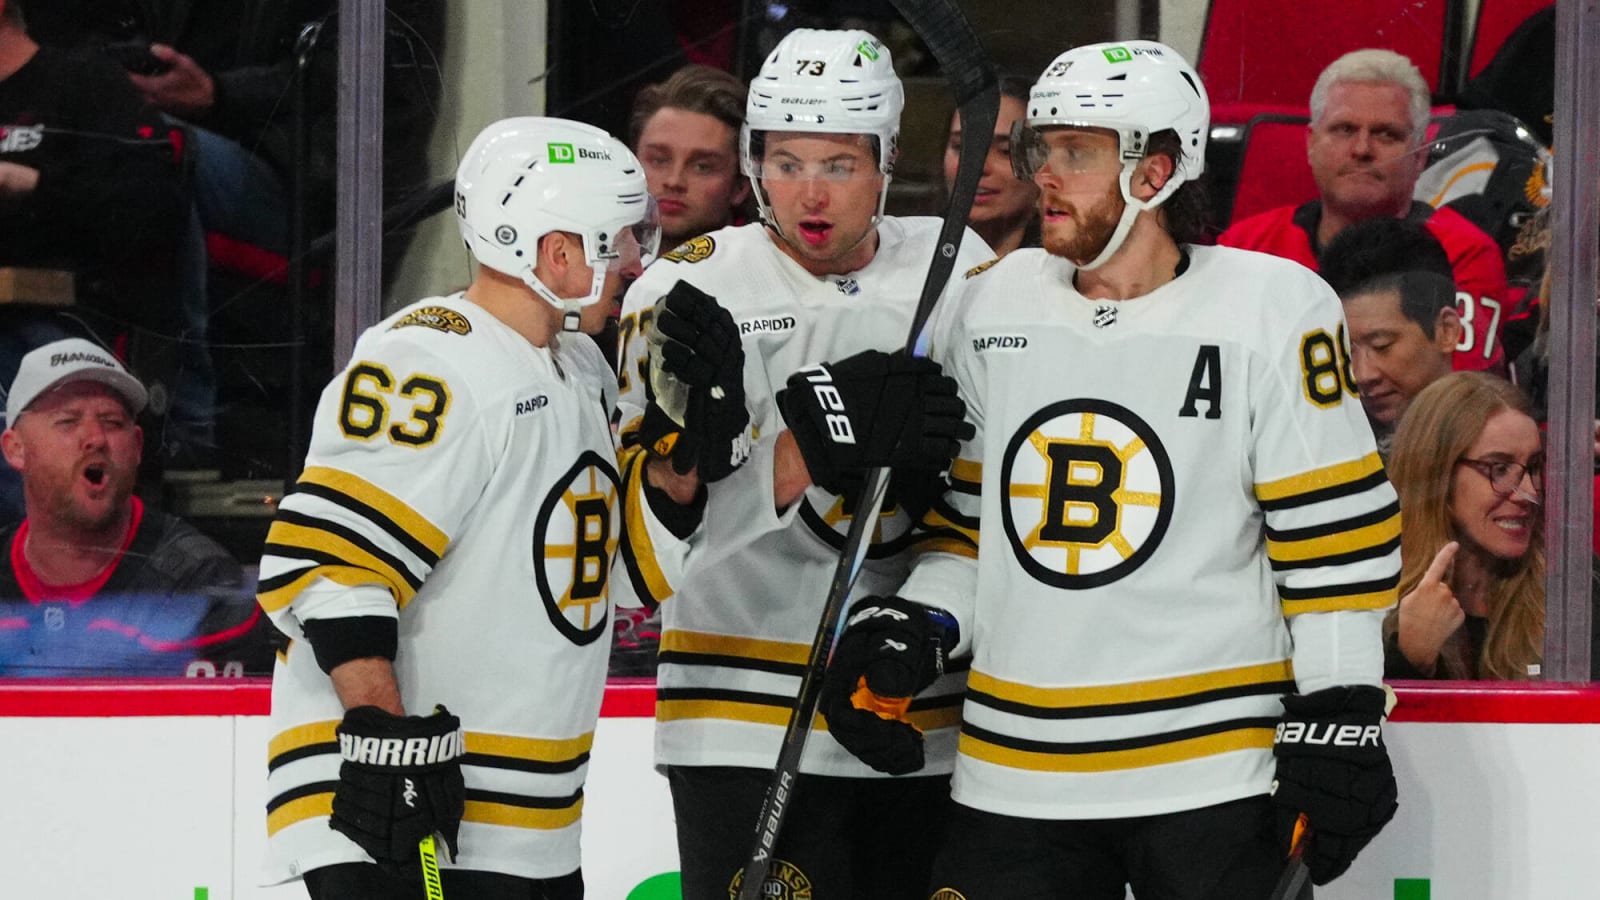 Bruins have been provoked, expect a strong Game 3 response